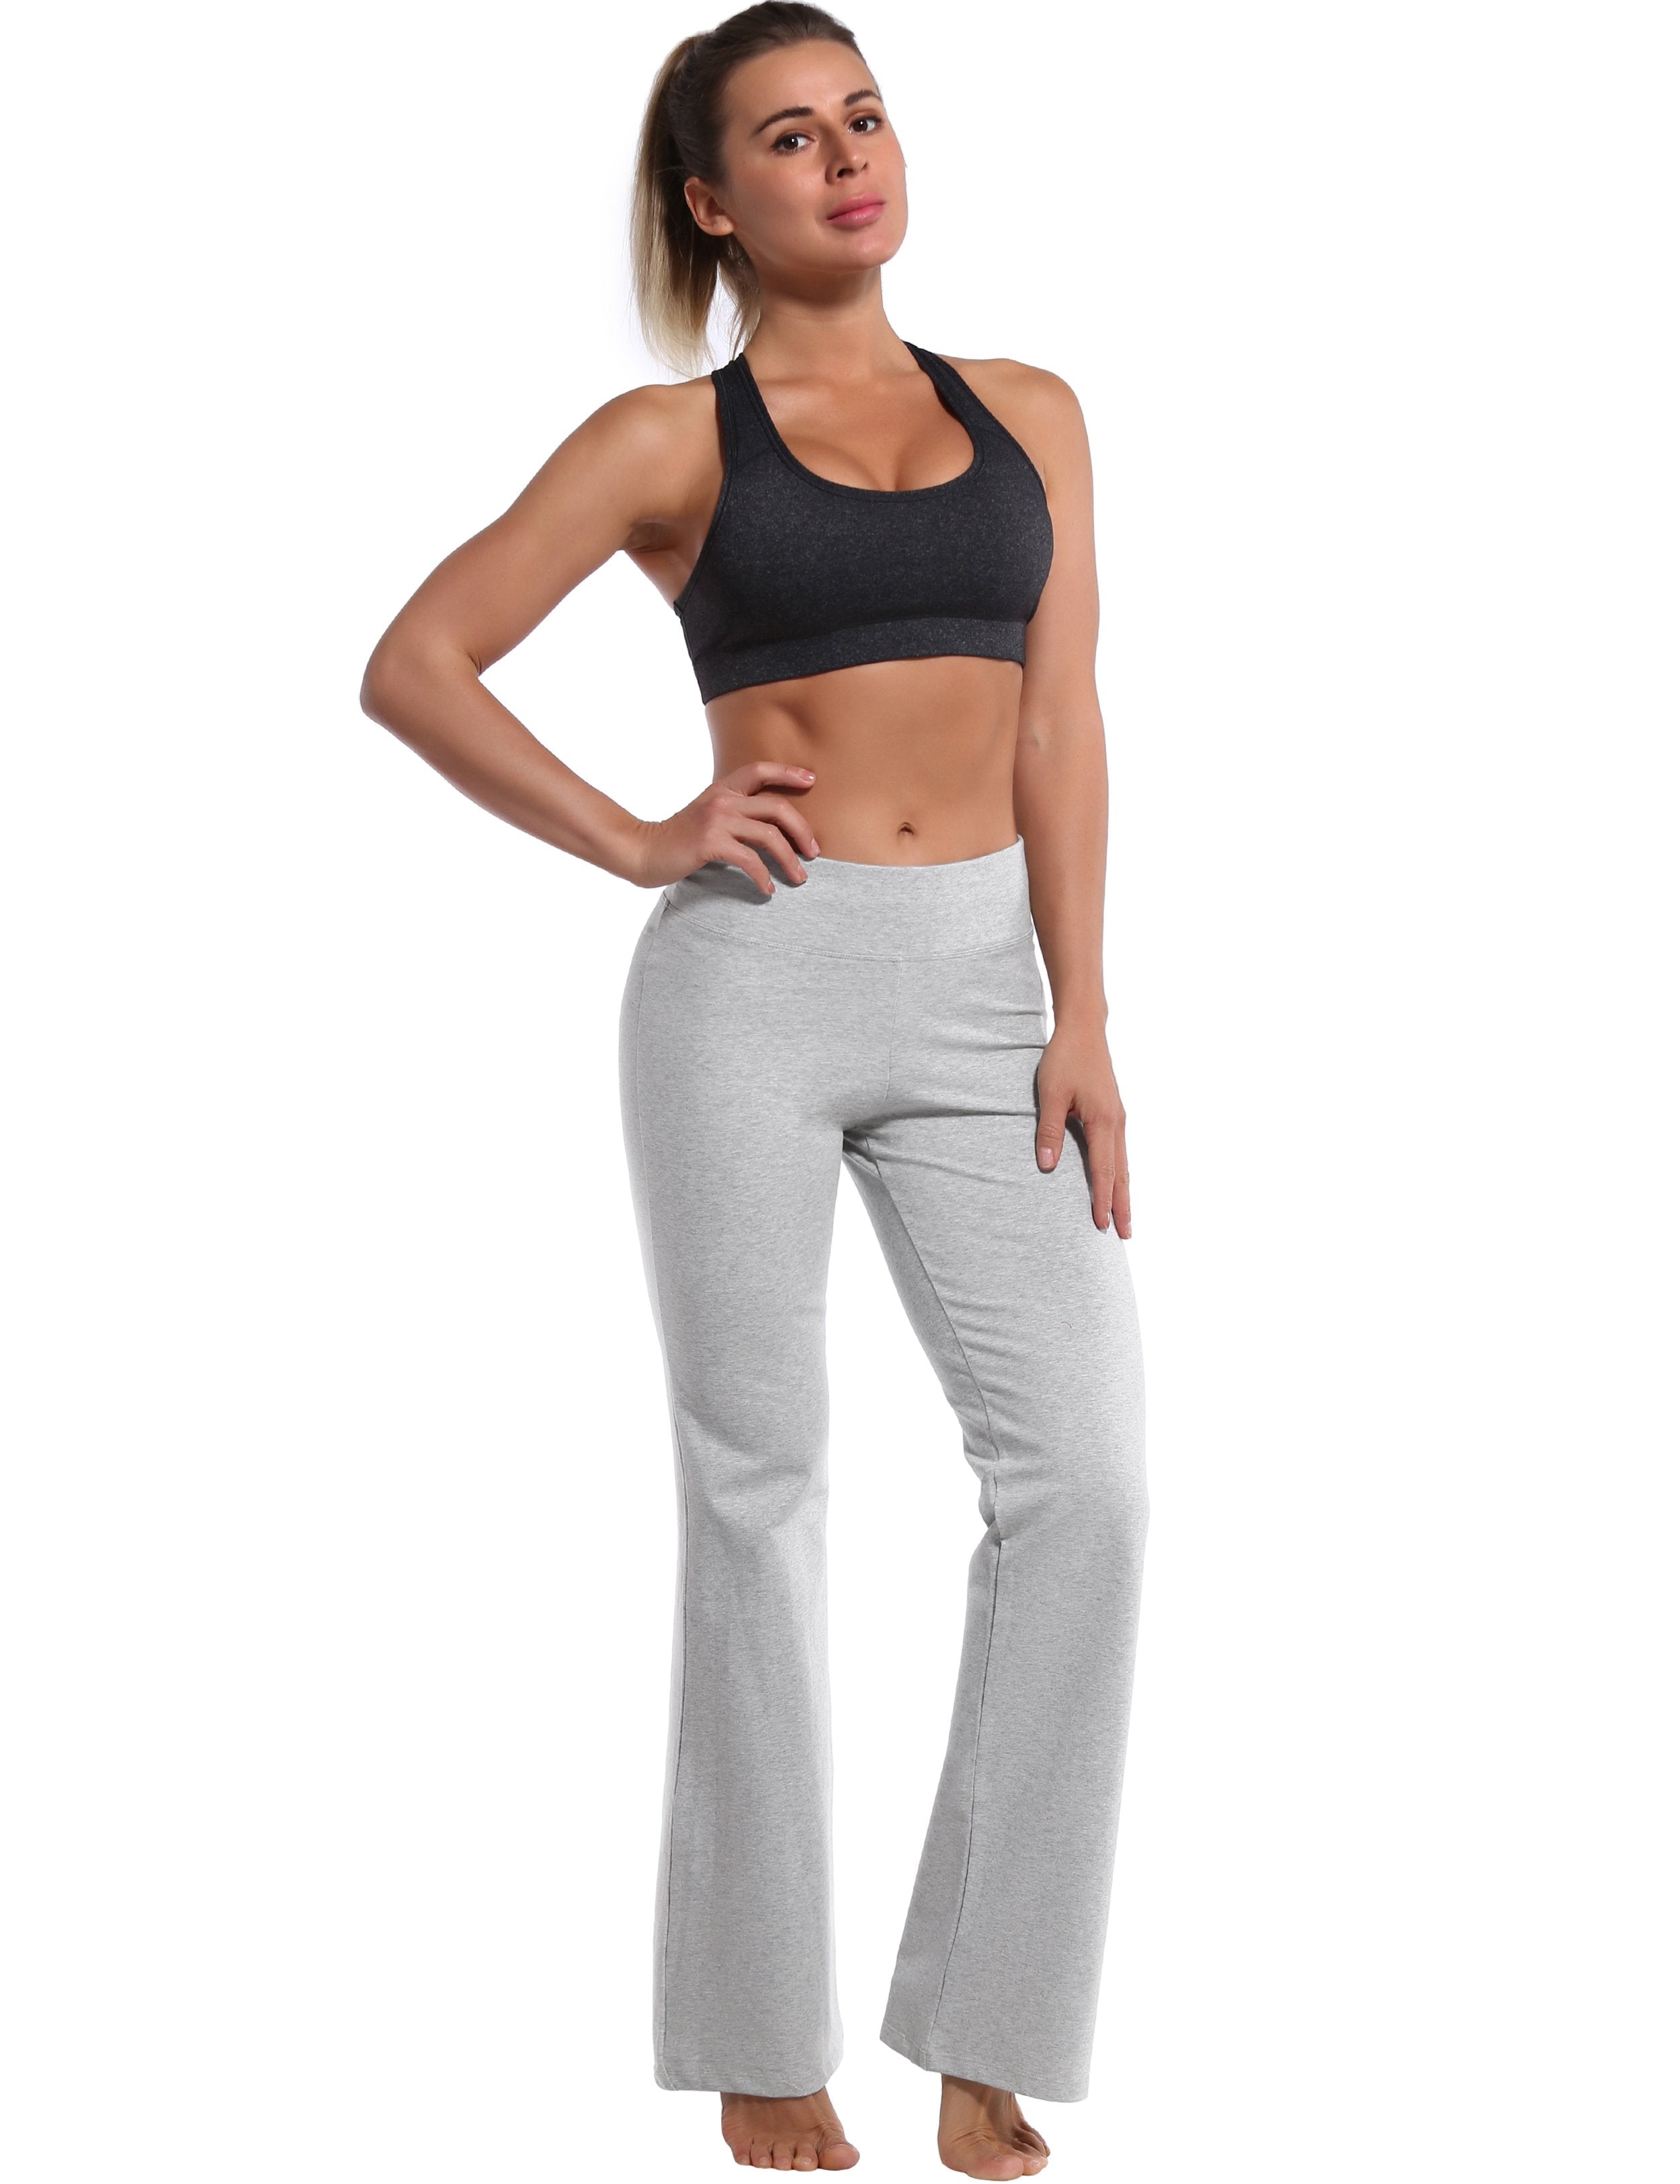 Cotton Bootcut Leggings heathergray 90%Cotton/10%Spandex (soft and cotton feel) Fabric doesn't attract lint easily 4-way stretch No see-through Moisture-wicking Inner pocket Four lengths